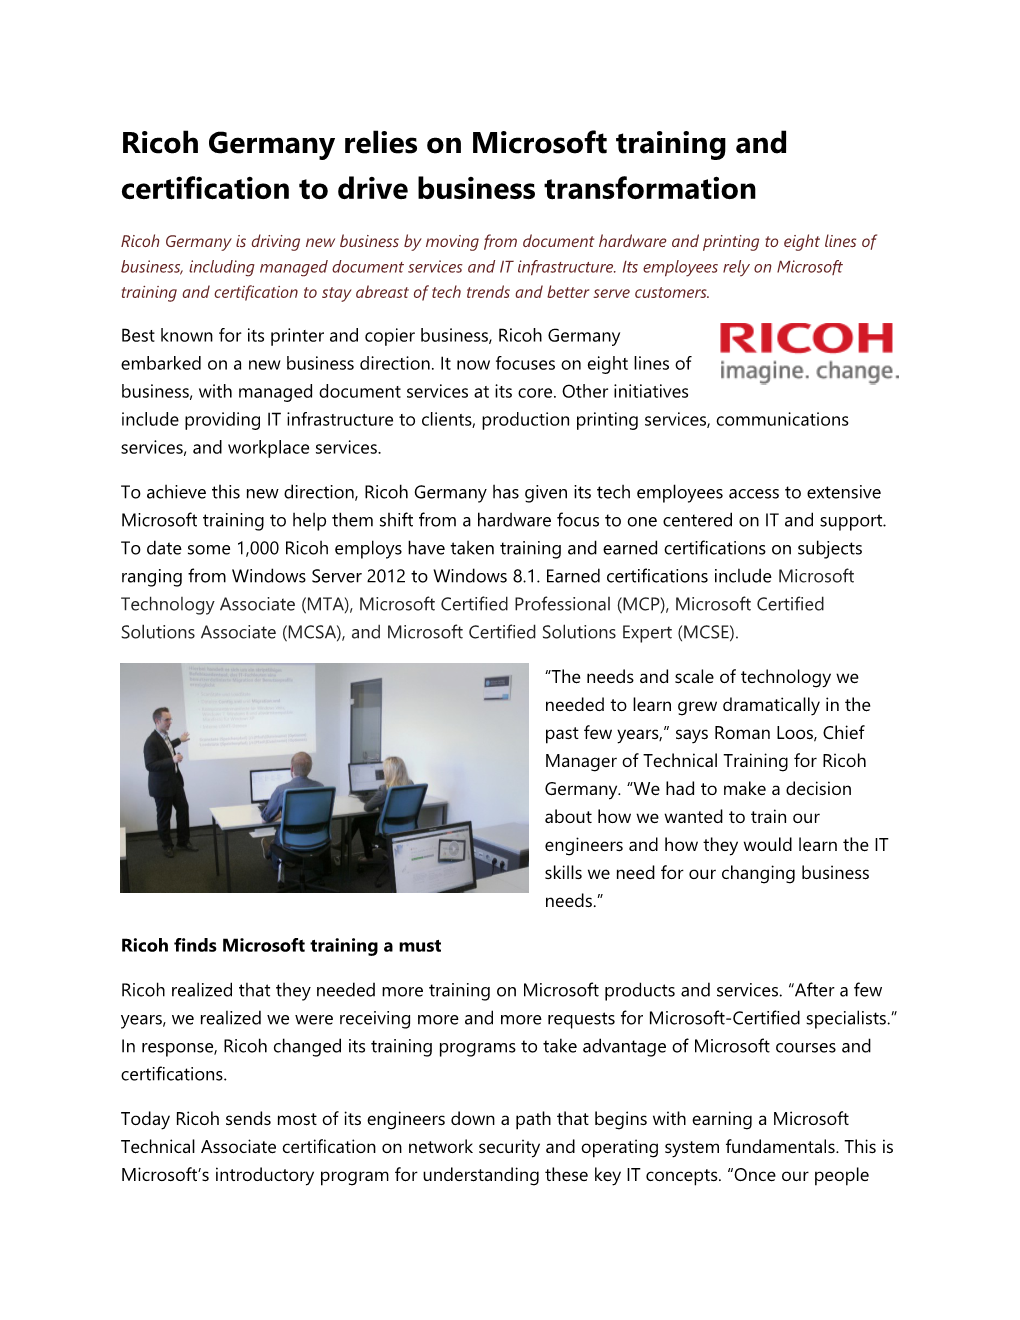 Ricoh Germany Relies on Microsoft Training and Certification to Drive Business Transformation